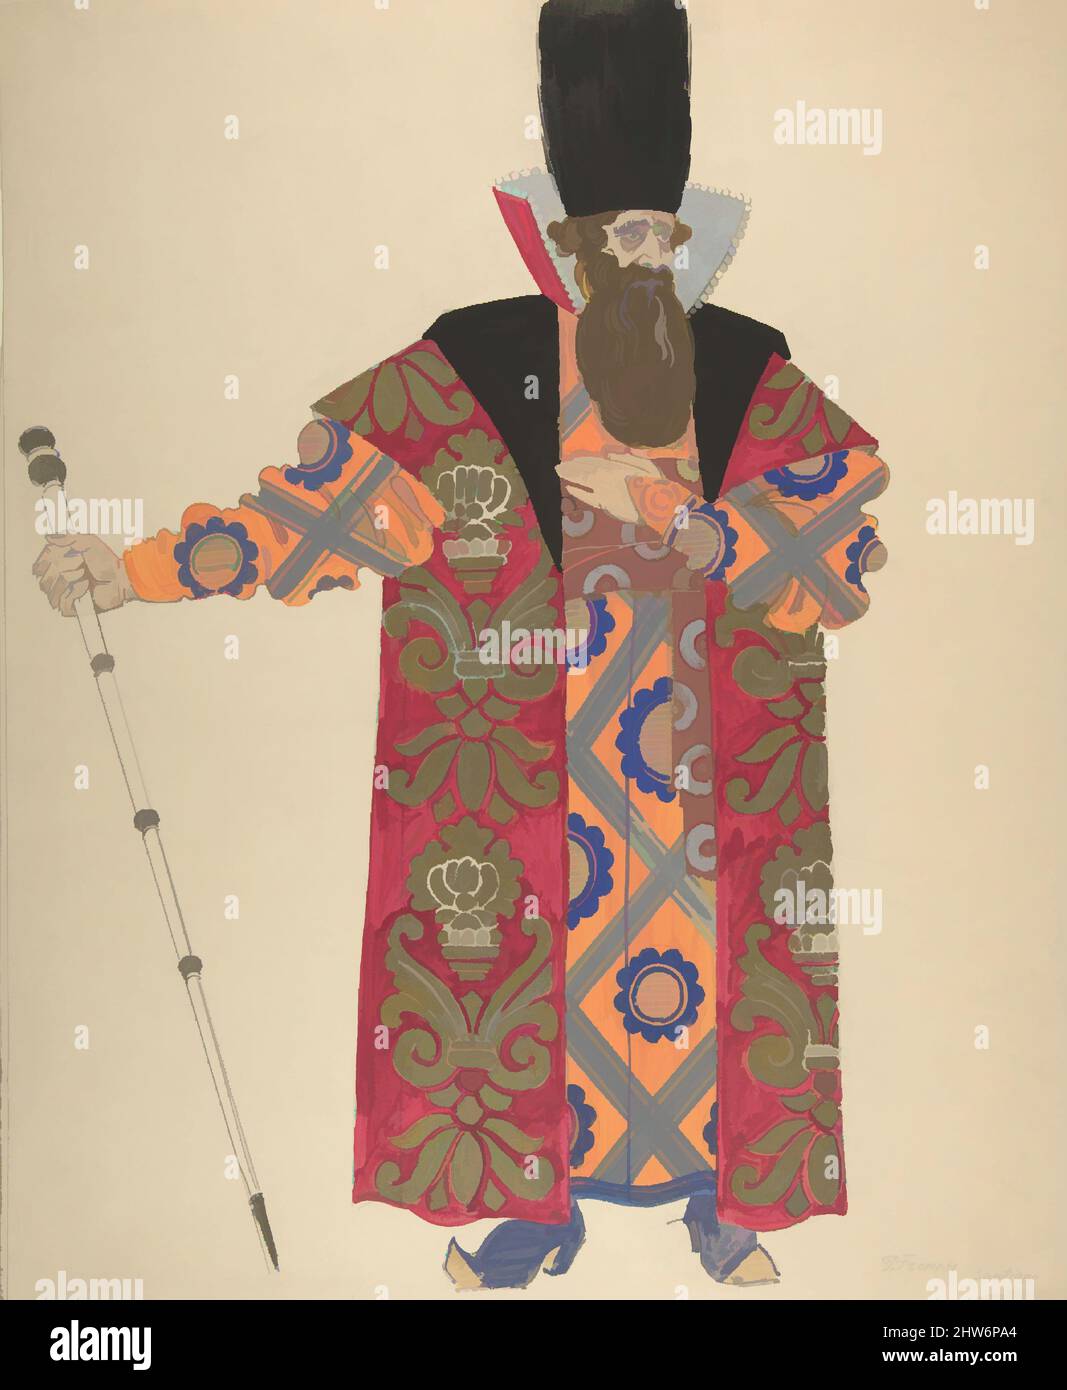 Art inspired by Costume Study for Robed, Bearded Boyar with Staff; verso: Sketch for the same figure, 1929, Watercolor, gouache, gold paint, over graphite; verso: graphite., sheet: 15 11/16 x 12 15/16 in. (39.9 x 32.9 cm), Drawings, Pavel Petrovic Froman (Russian, Moscow 1894–1940, Classic works modernized by Artotop with a splash of modernity. Shapes, color and value, eye-catching visual impact on art. Emotions through freedom of artworks in a contemporary way. A timeless message pursuing a wildly creative new direction. Artists turning to the digital medium and creating the Artotop NFT Stock Photo